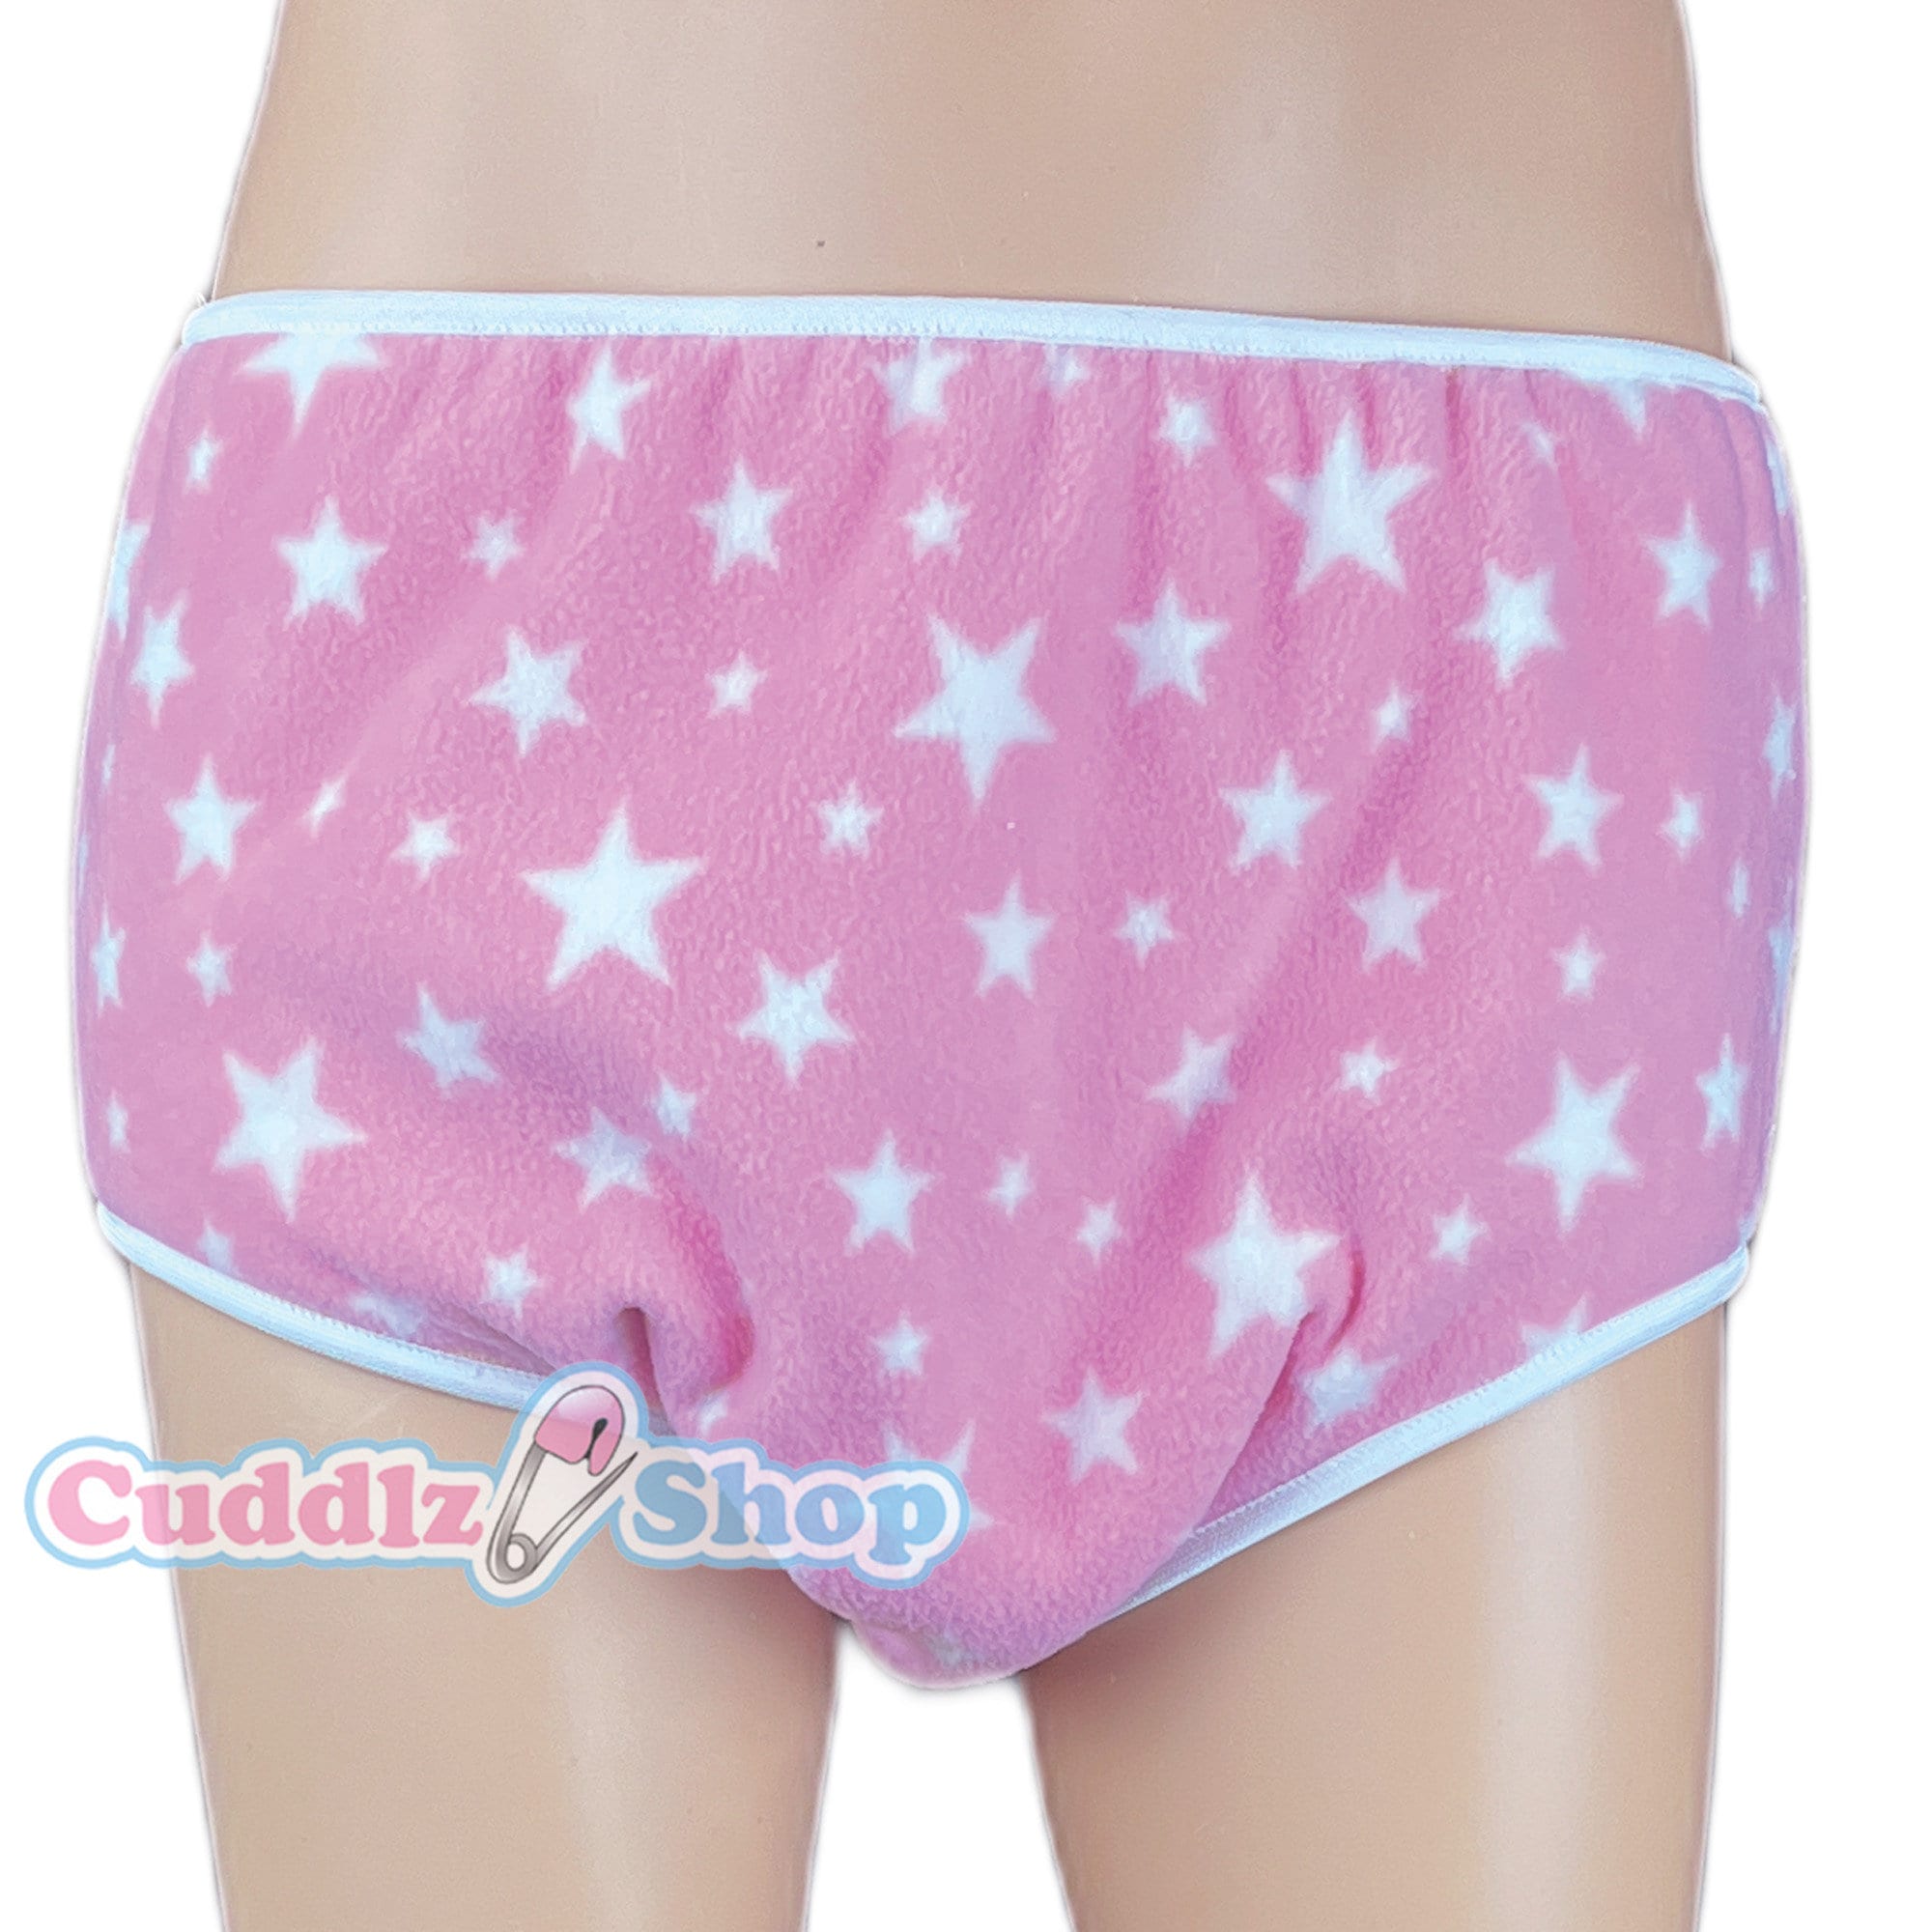 Cuddlz Pink Star Fleece and White Adult Terry Towelling Incontinence Pull  up Pants / Briefs for Men or Women Washable Nappy Diaper -  Canada